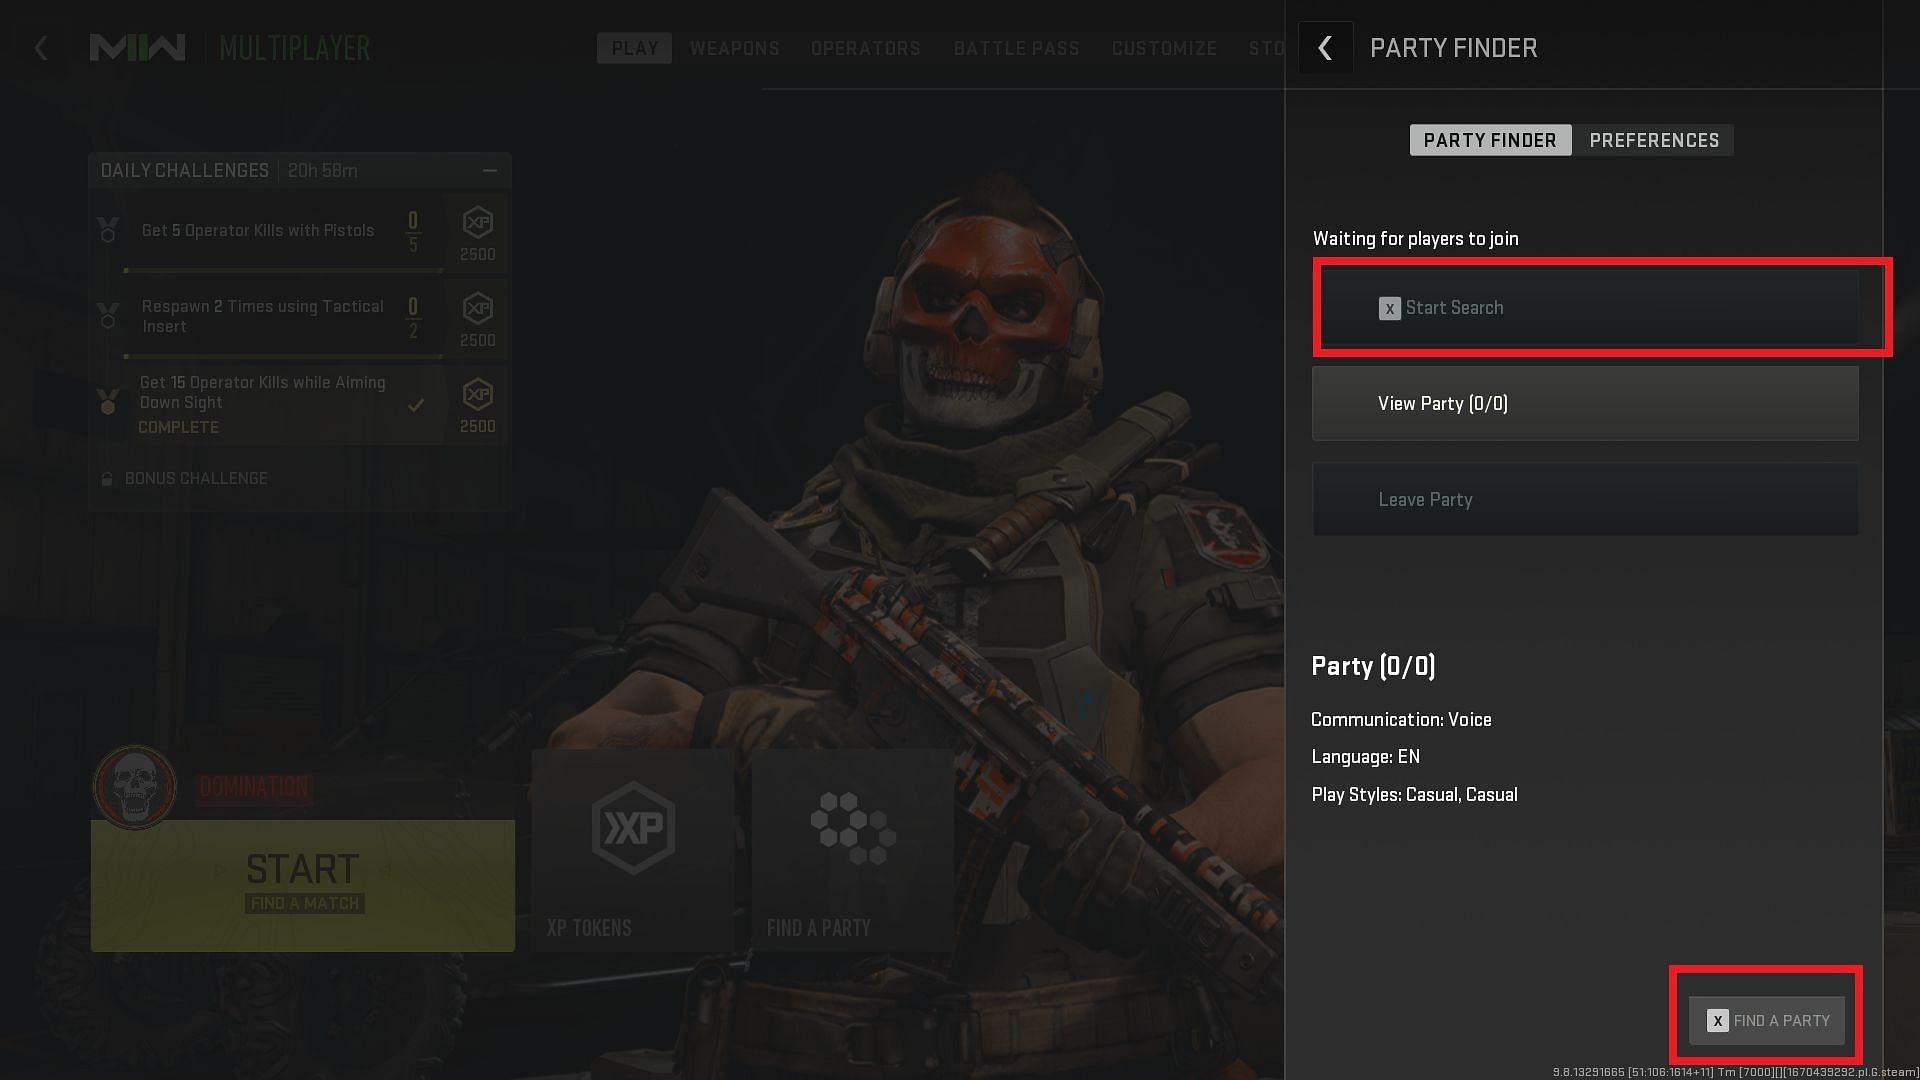 The Start Search option is grayed out in the Party Finder (Image via Activision)